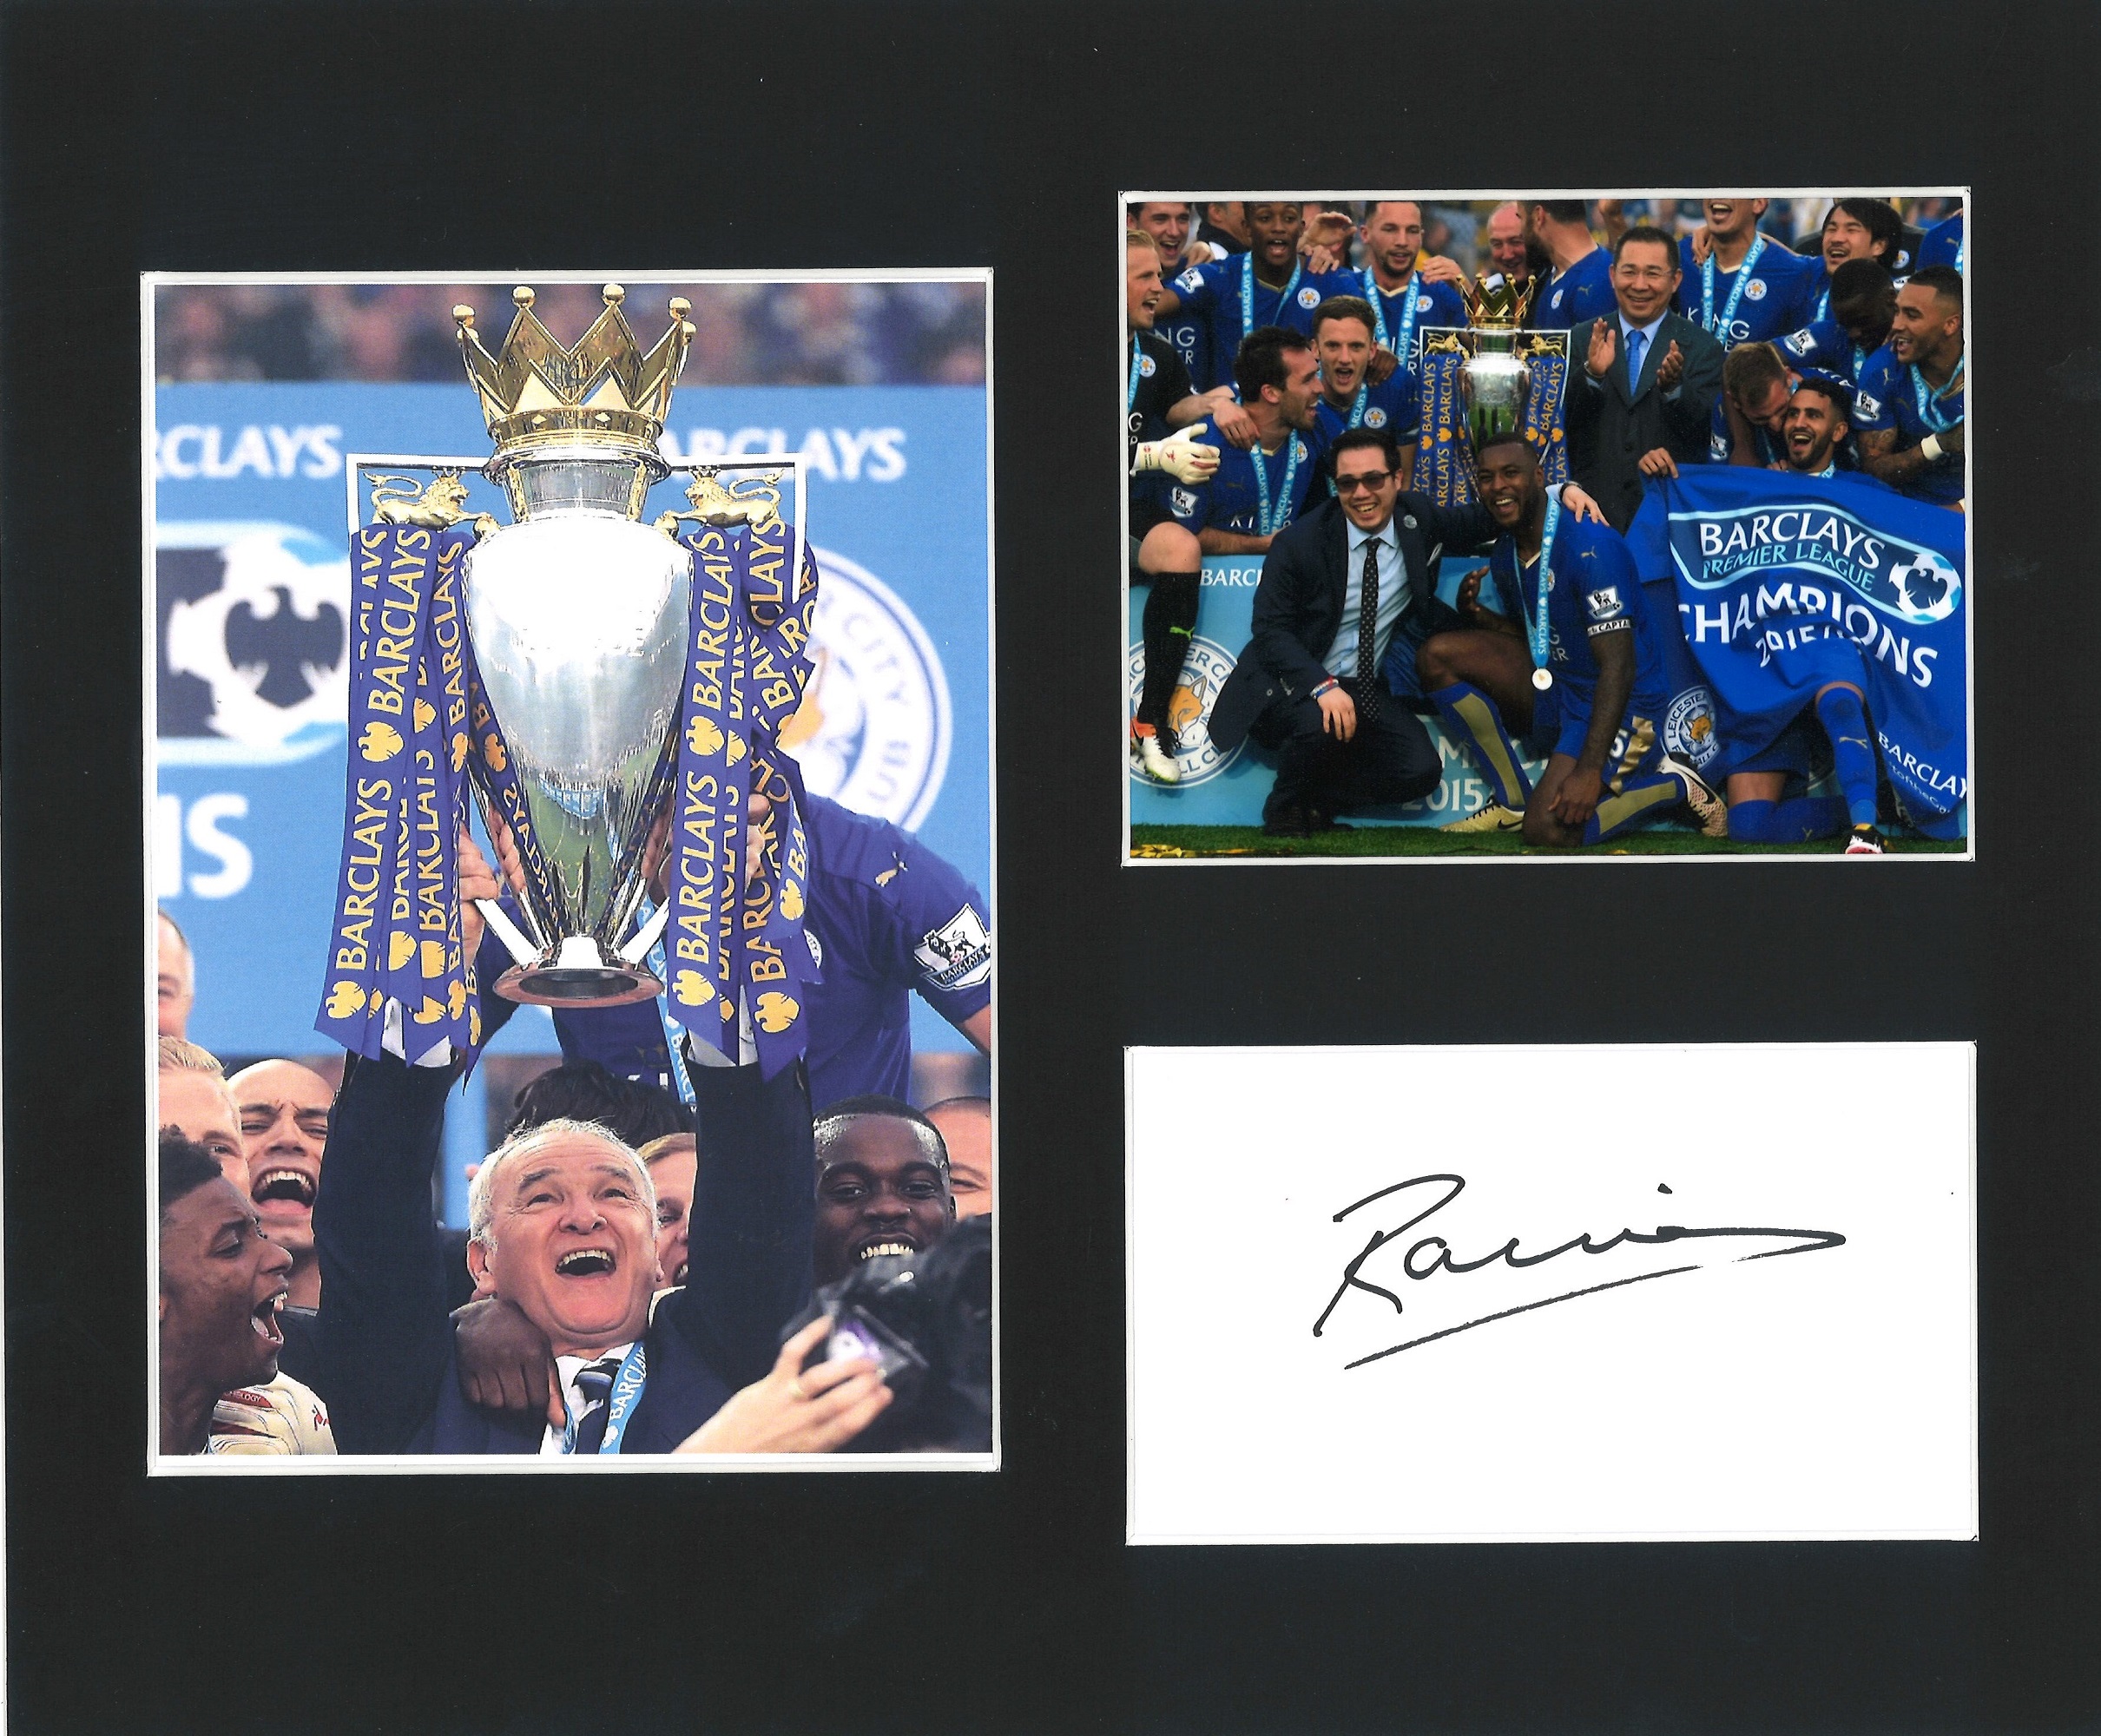 Football Claudio Ranieri 12x10 mounted signature piece includes two colour photos during his time